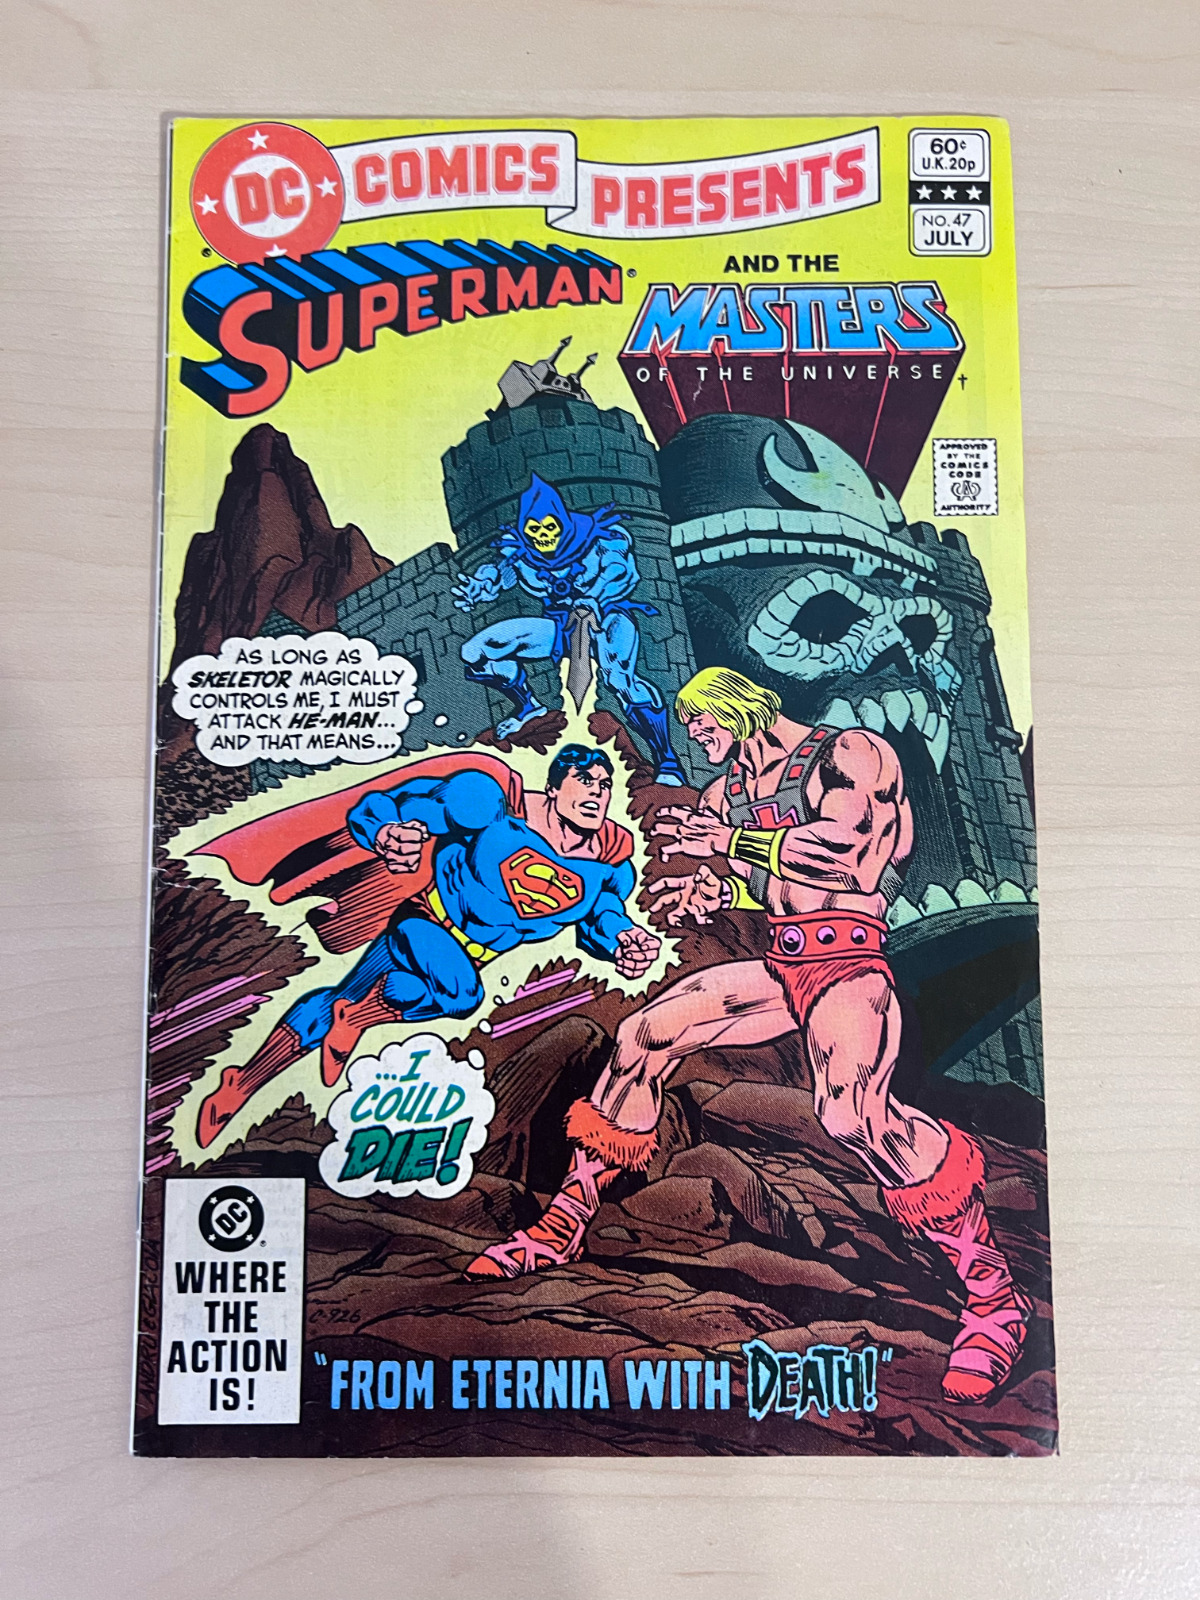 Vintage DC Comic Book SUPERMAN AND THE MASTERS OF THE UNIVERSE #47 July 1982